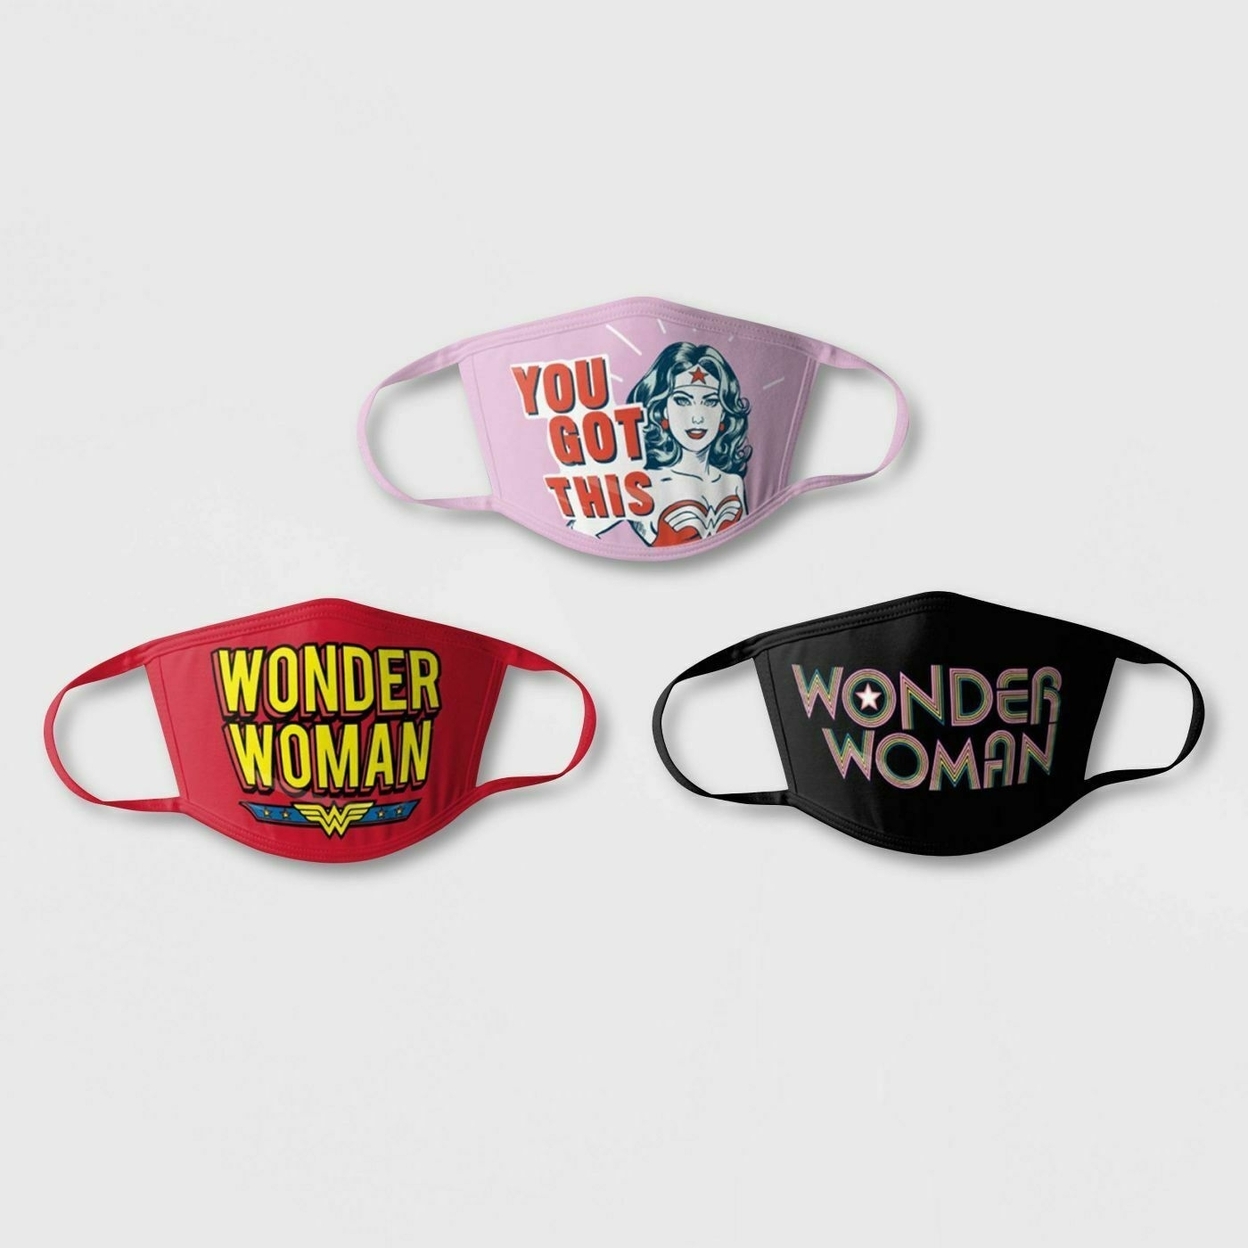 6-Pack: Children's Seamless Reusable Washable Breathable Character Face Mask Bandana - Wonder Woman